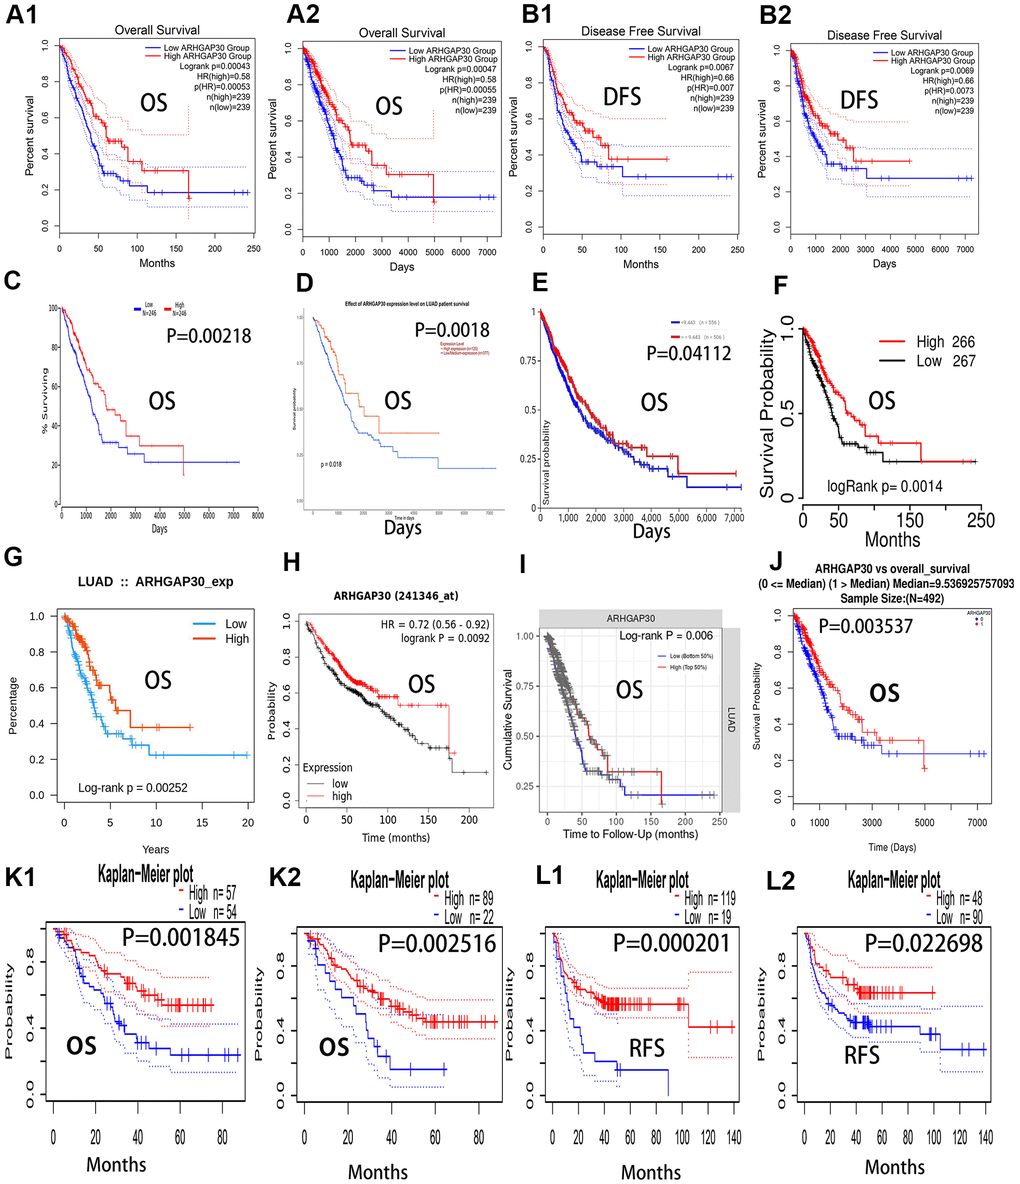 Overall survival curves, recurrence-free survival curves, and disease-free survival curves of ARHGAP30 in lung adenocarcinoma. The blue curves represent patients with lung adenocarcinoma with low ARHGAP30 expression, and the red curves represent patients with lung adenocarcinoma with high ARHGAP30 expression. (A1, A2) Two overall survival curves (in months and days, respectively) from the GEPIA database; (B1, B2) Two disease-free survival (DFS) curves for ARHGAP30 in the GEPIA database (in months and days, respectively). (C–J) Eight overall survival curves from the databases of Oncolnc, Ualcan, UCSC, TCGAportal, TISIDB, KMplot, TIMER, and Linkedomics, respectively. (K1, K2) Two survival curves representing the overall survival curves from the PrognoScan database. (L1, L2) Two survival curves representing recurrence-free survival curves from the PrognoScan database.